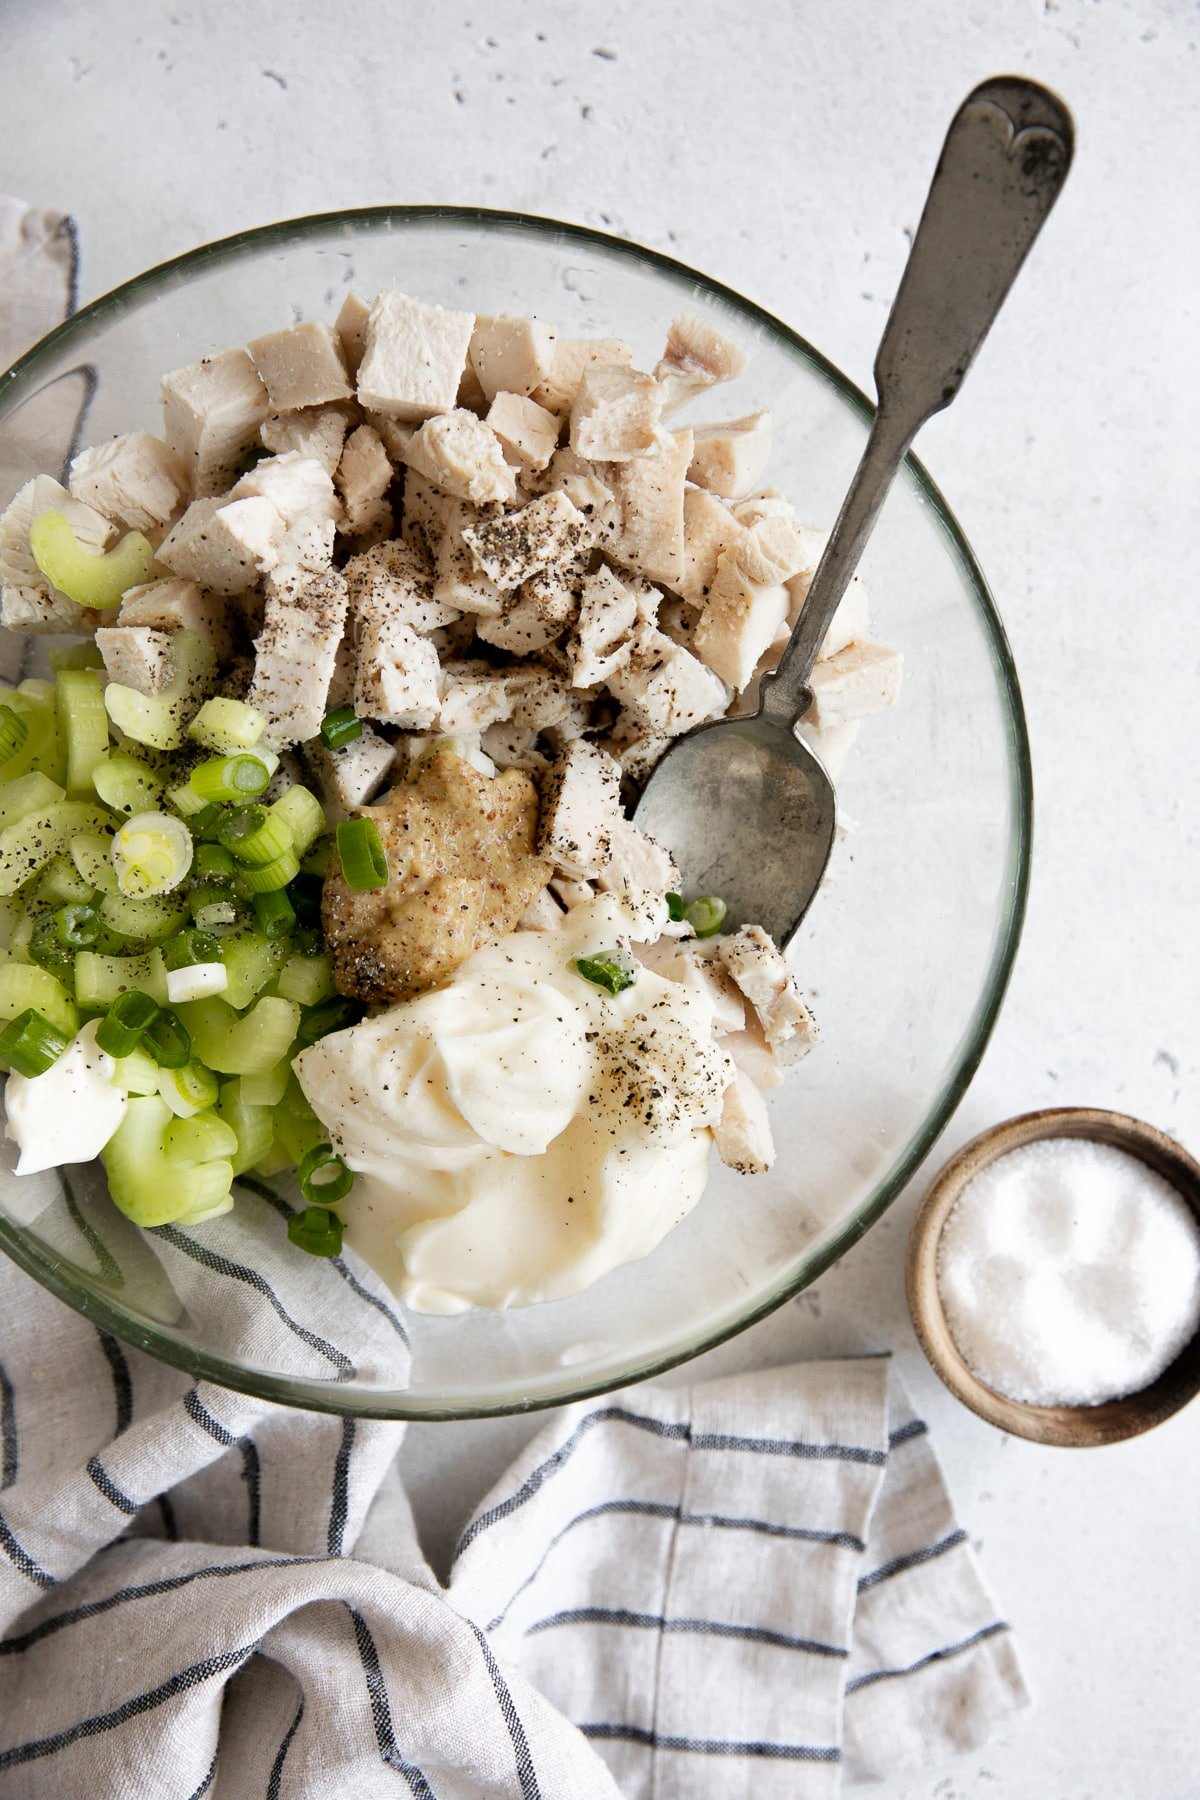 Chopped poached chicken, mayonnaise, brown mustard, celery, and green onions in a large glass mixing bowl.